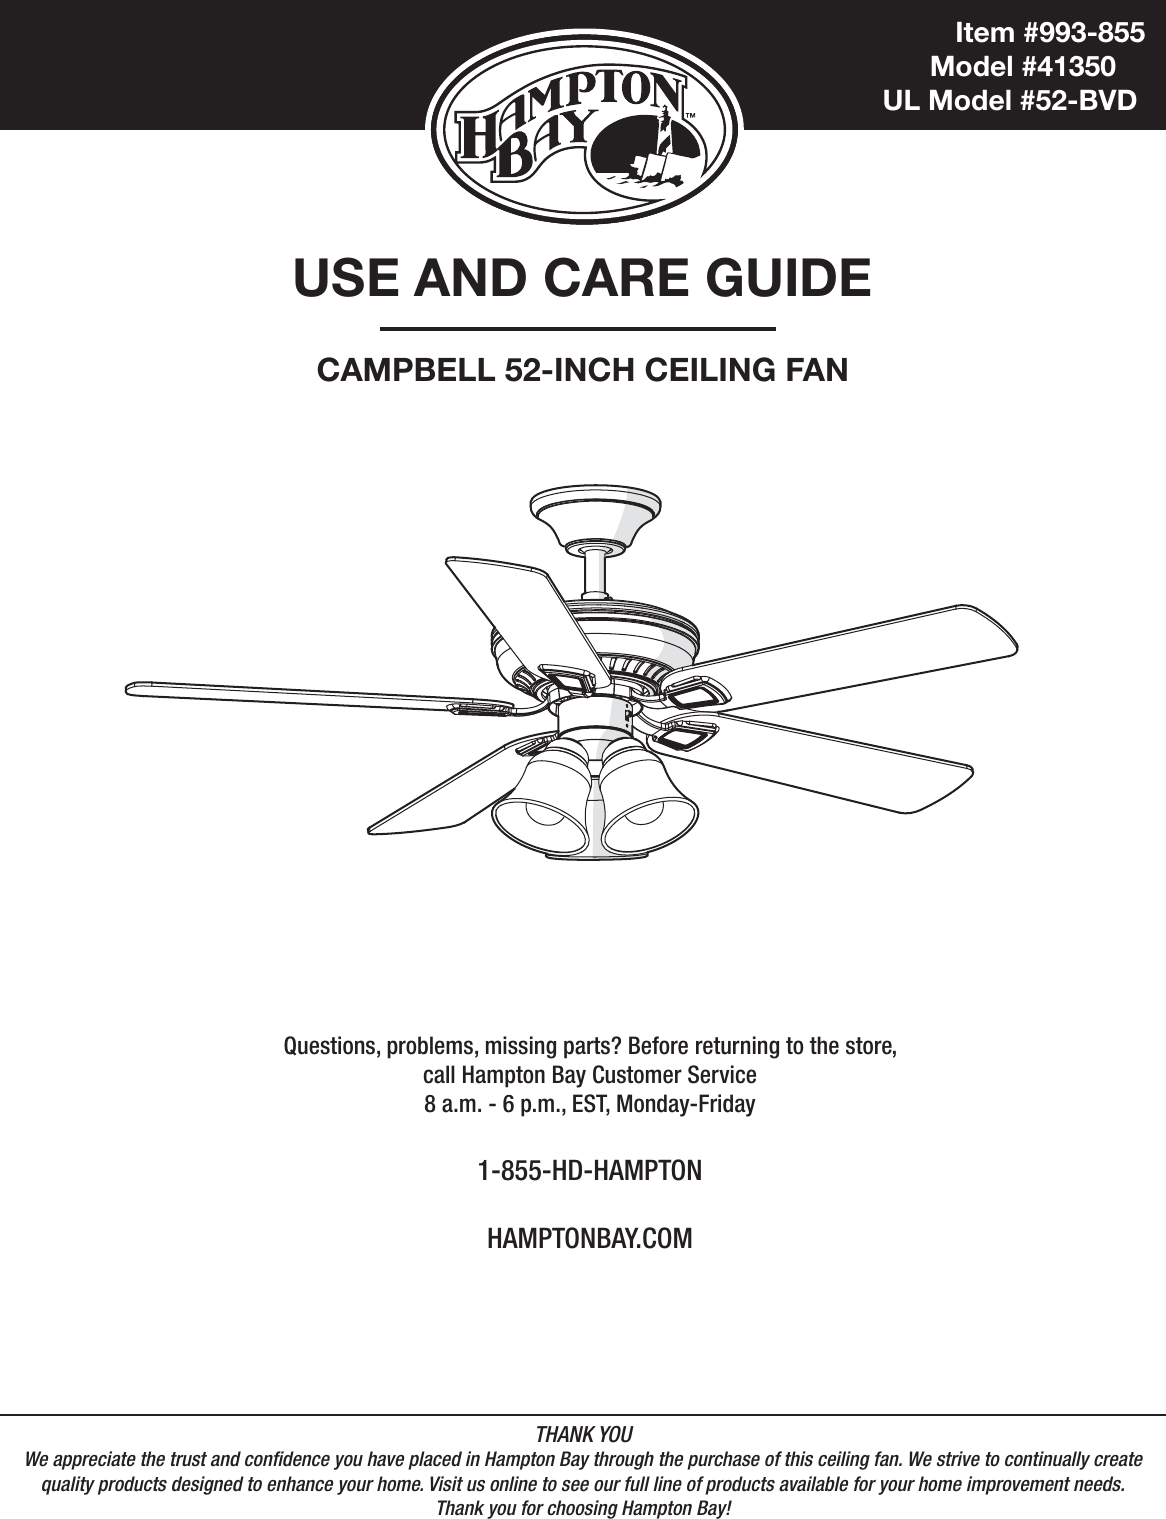 Item #993-855            Model #41350UL Model #52-BVDUSE AND CARE GUIDECAMPBELL 52-INCH CEILING FANQuestions, problems, missing parts? Before returning to the store,call Hampton Bay Customer Service8 a.m. - 6 p.m., EST, Monday-Friday1-855-HD-HAMPTONHAMPTONBAY.COMTHANK YOUWe appreciate the trust and condence you have placed in Hampton Bay through the purchase of this ceiling fan. We strive to continually createquality products designed to enhance your home. Visit us online to see our full line of products available for your home improvement needs. Thank you for choosing Hampton Bay!